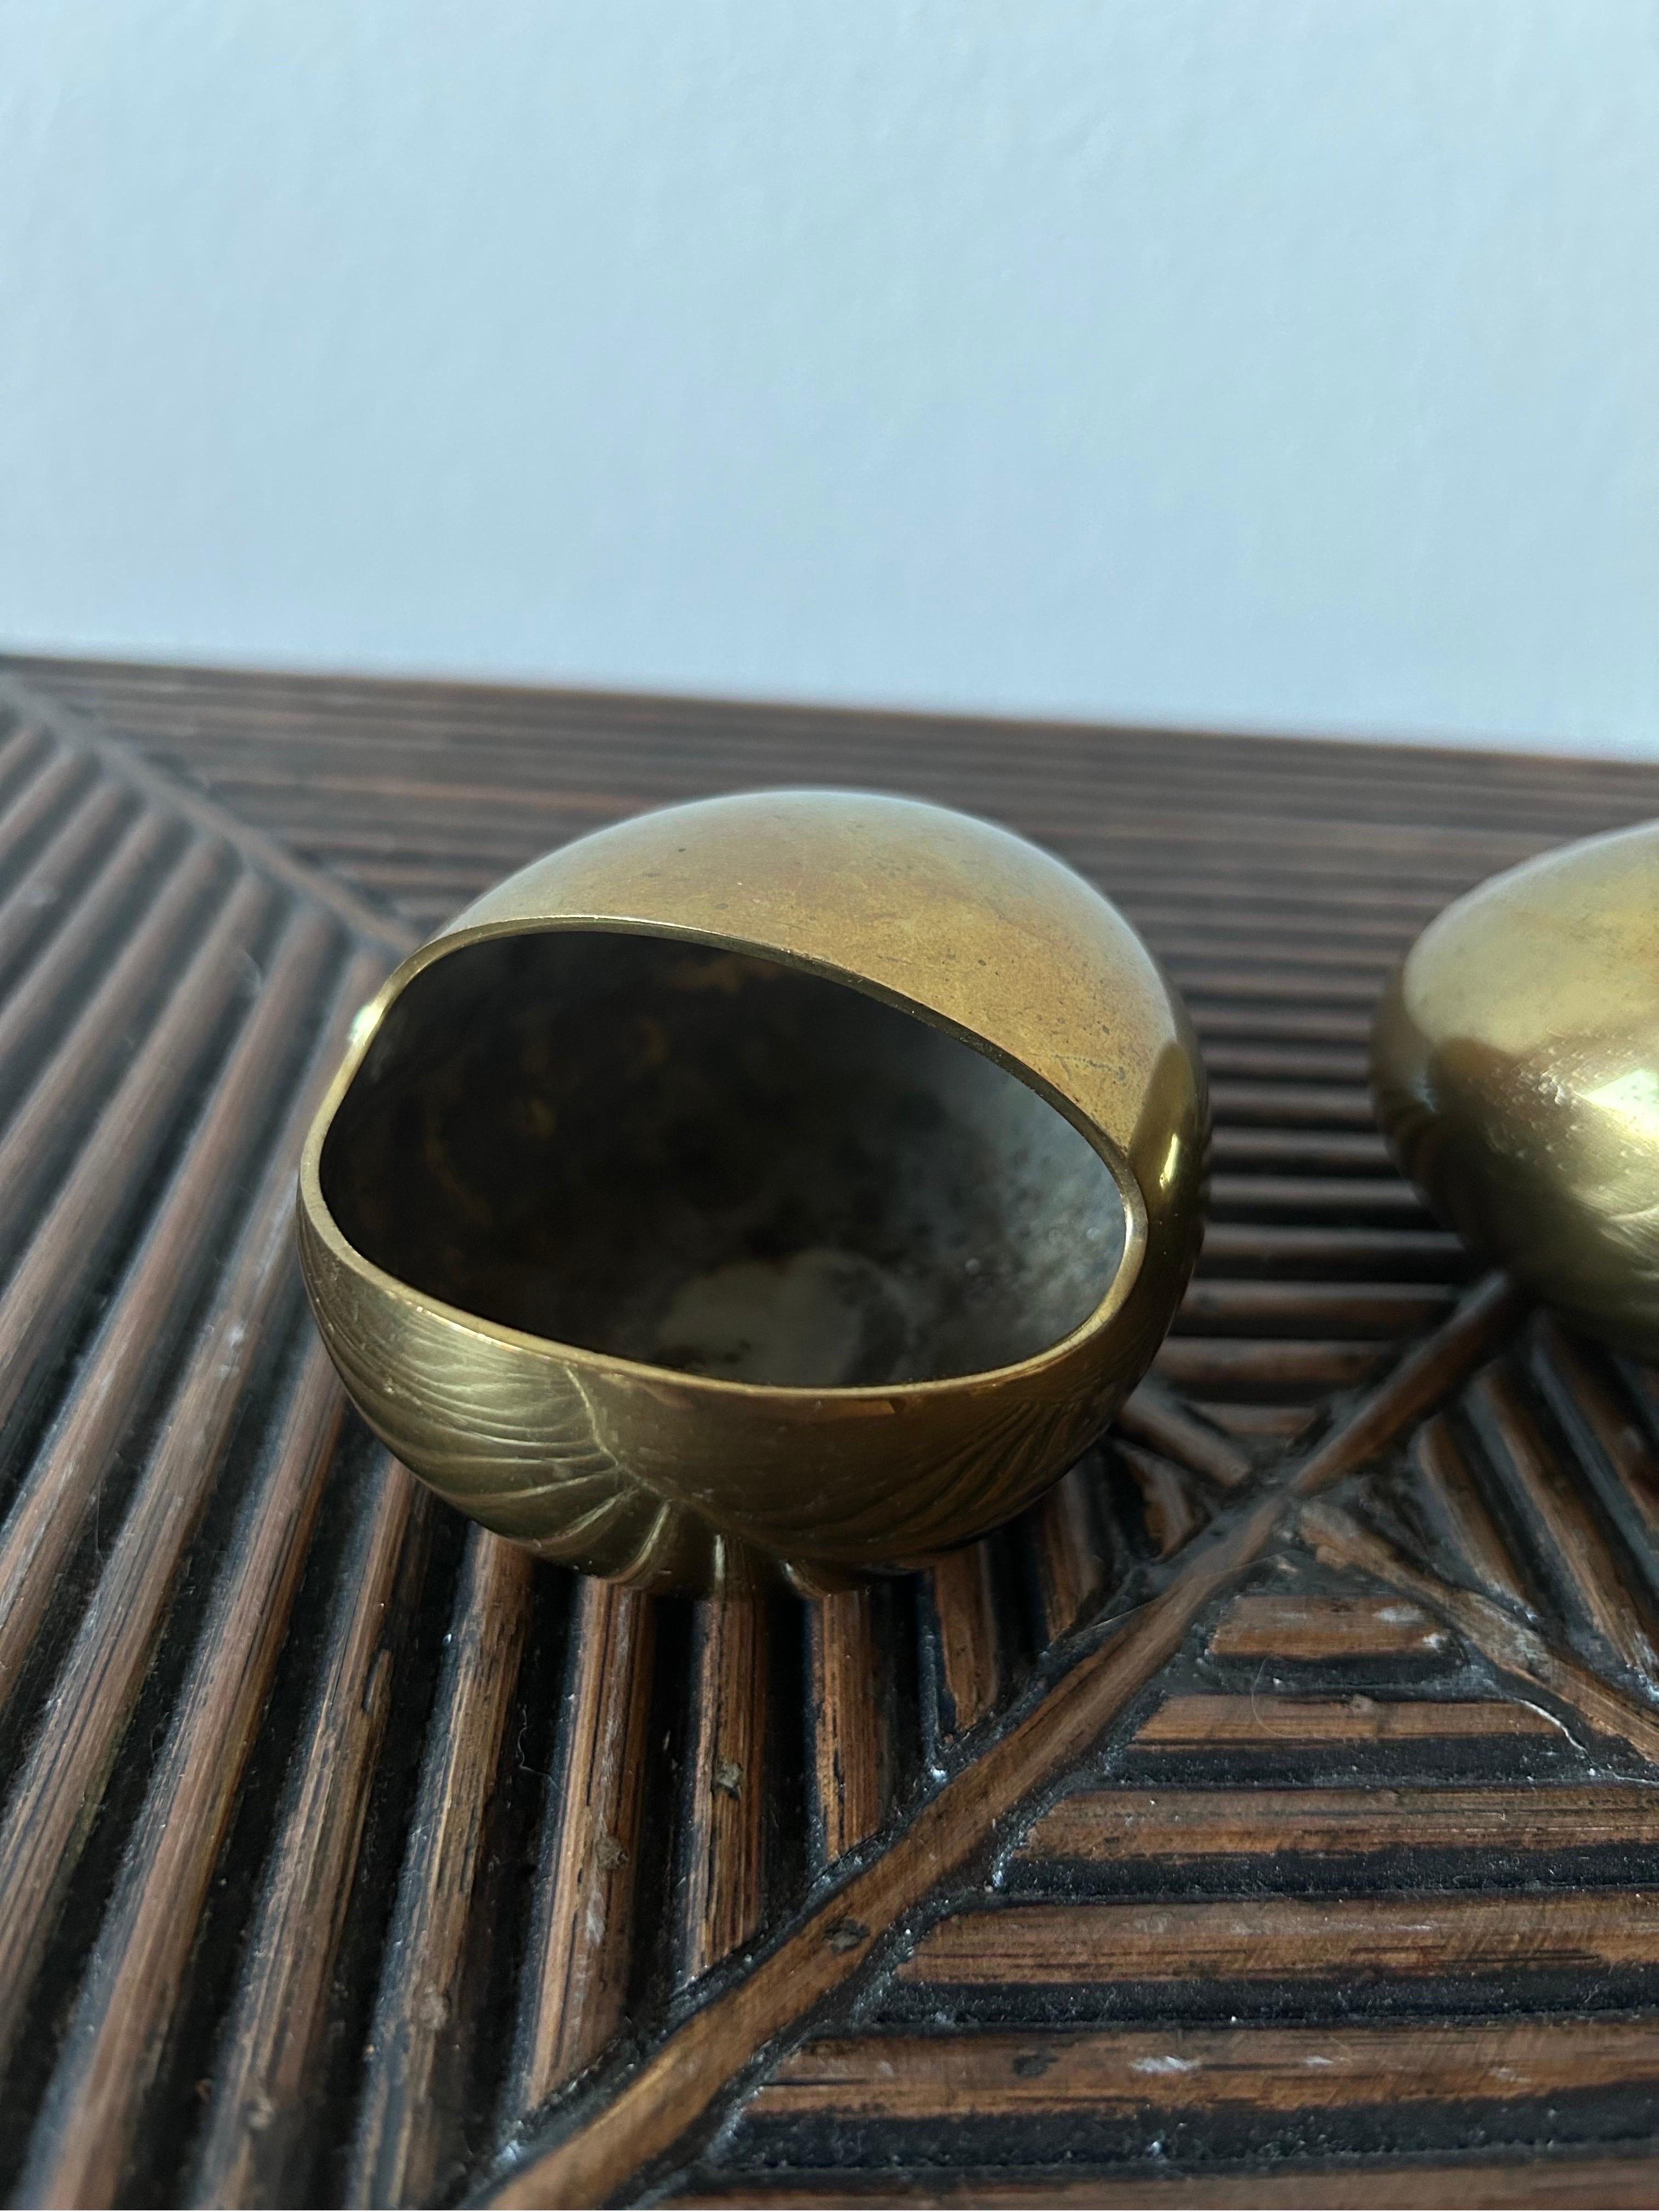 Pair of Cohr ashtrays made in patinaed brass in Denmark in the 1960’s.
This model is called the smile and can be used as a ashtray or as decorative object.
The ashtray is designed by danish silversmith Hans Bunde.

Carl Mads Cohr (11 August 1862